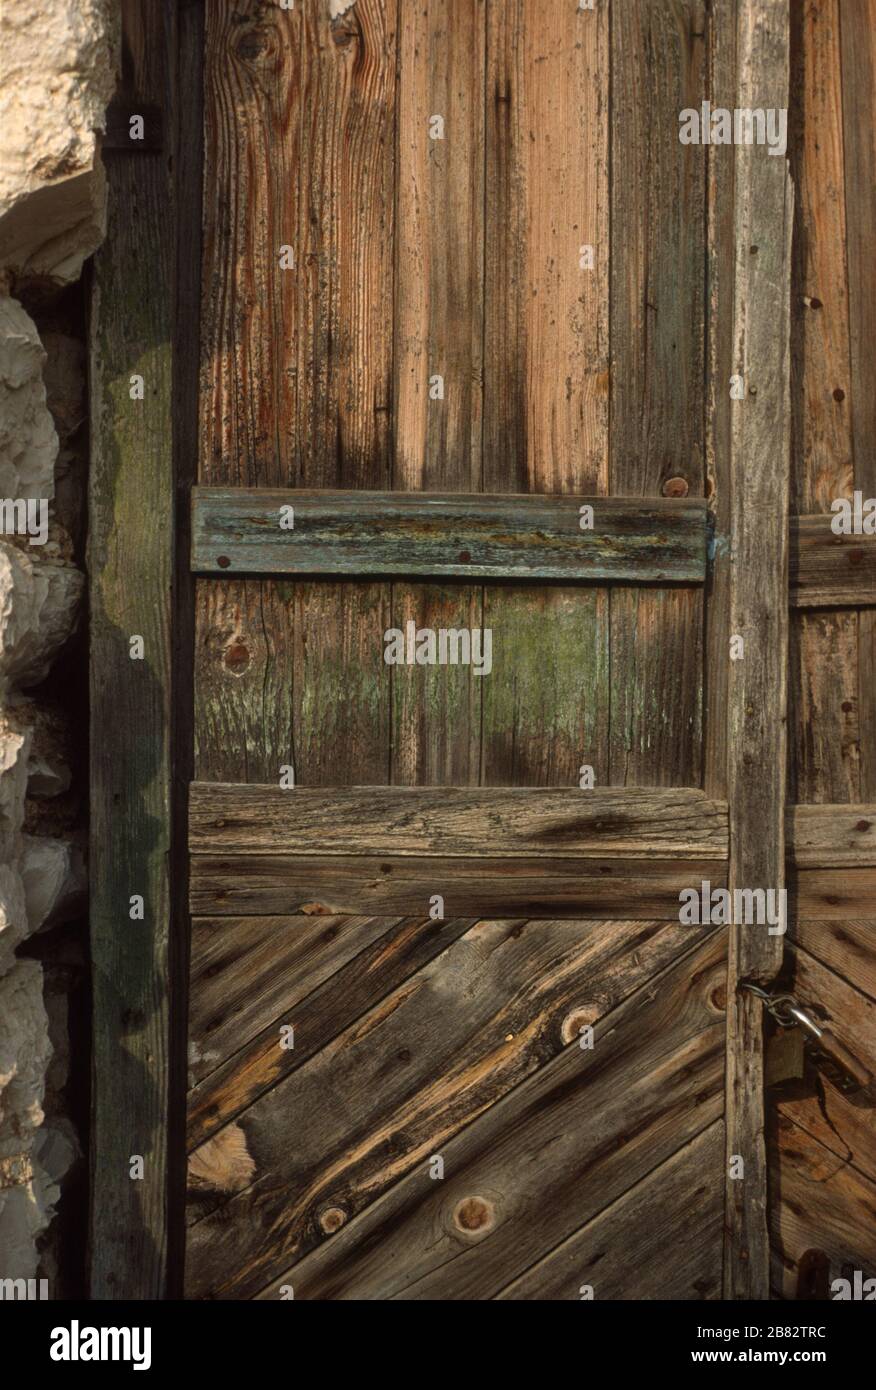 Beautiful, old, stained, wooden door set into a stone house in Lia (Lias), Epirus, Greece. The varnish is wearing, showing the grain, knots and texture in the wood. Stock Photo